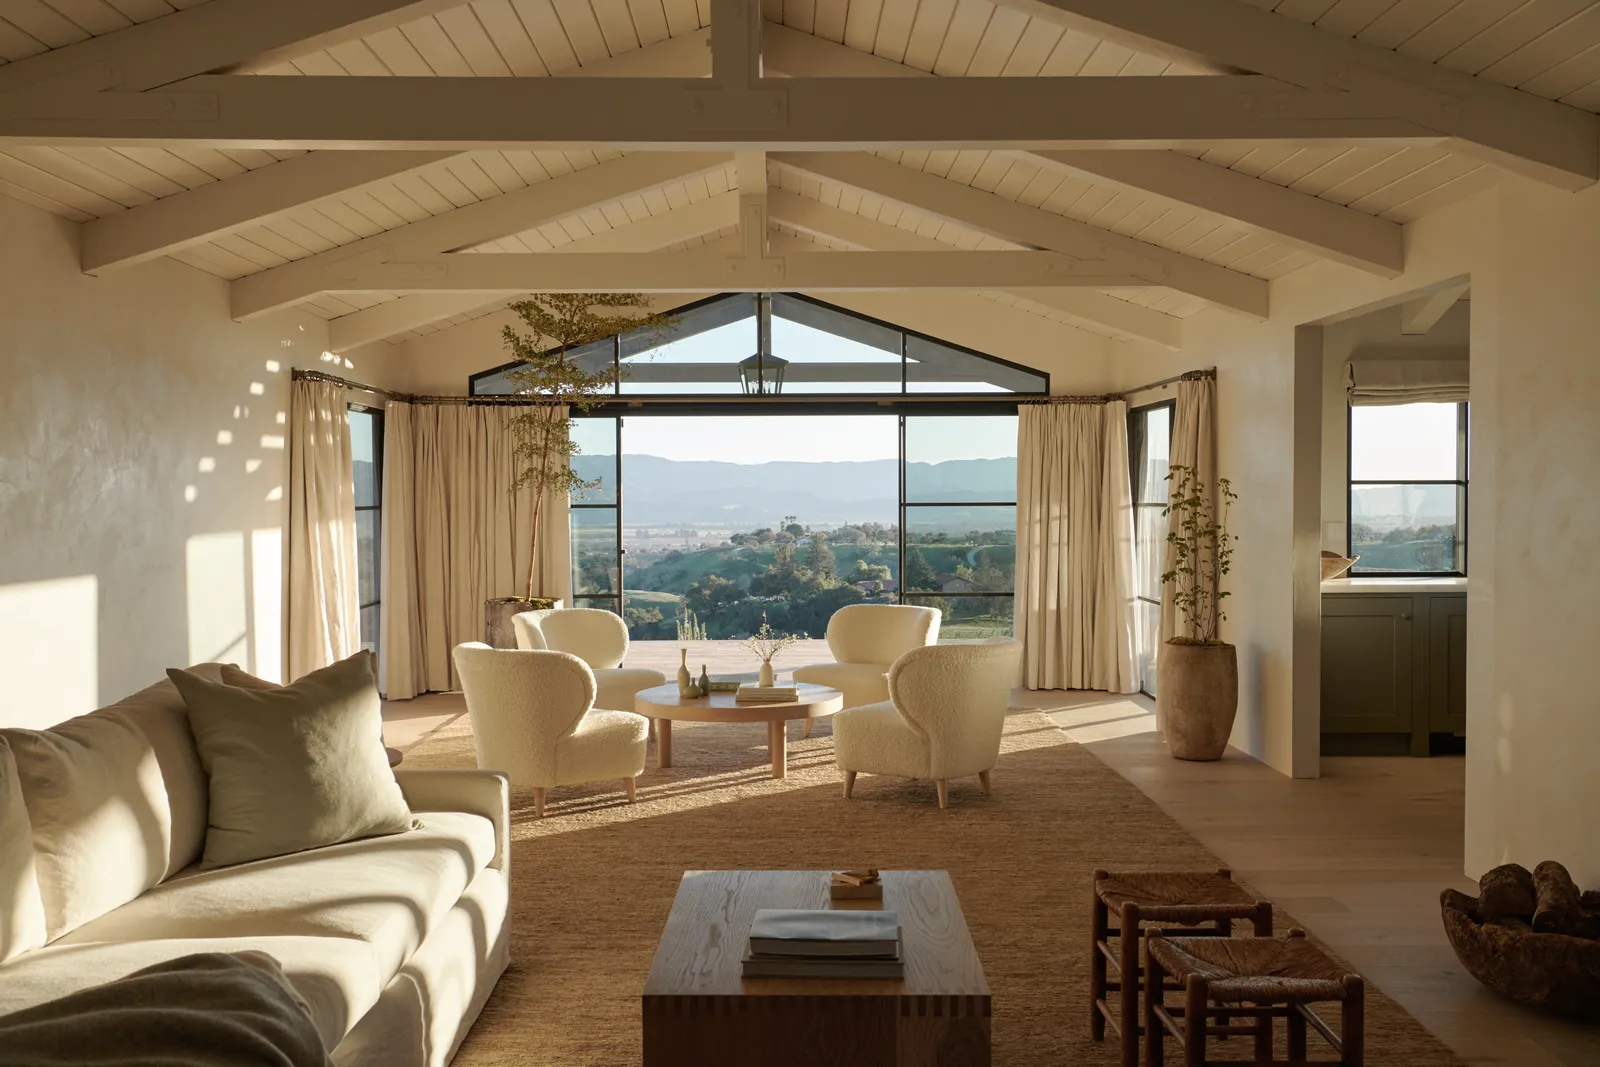 The expansive living area at a ranch property in Santa Ynez by designer Jenni Kayne- Quiet Luxury